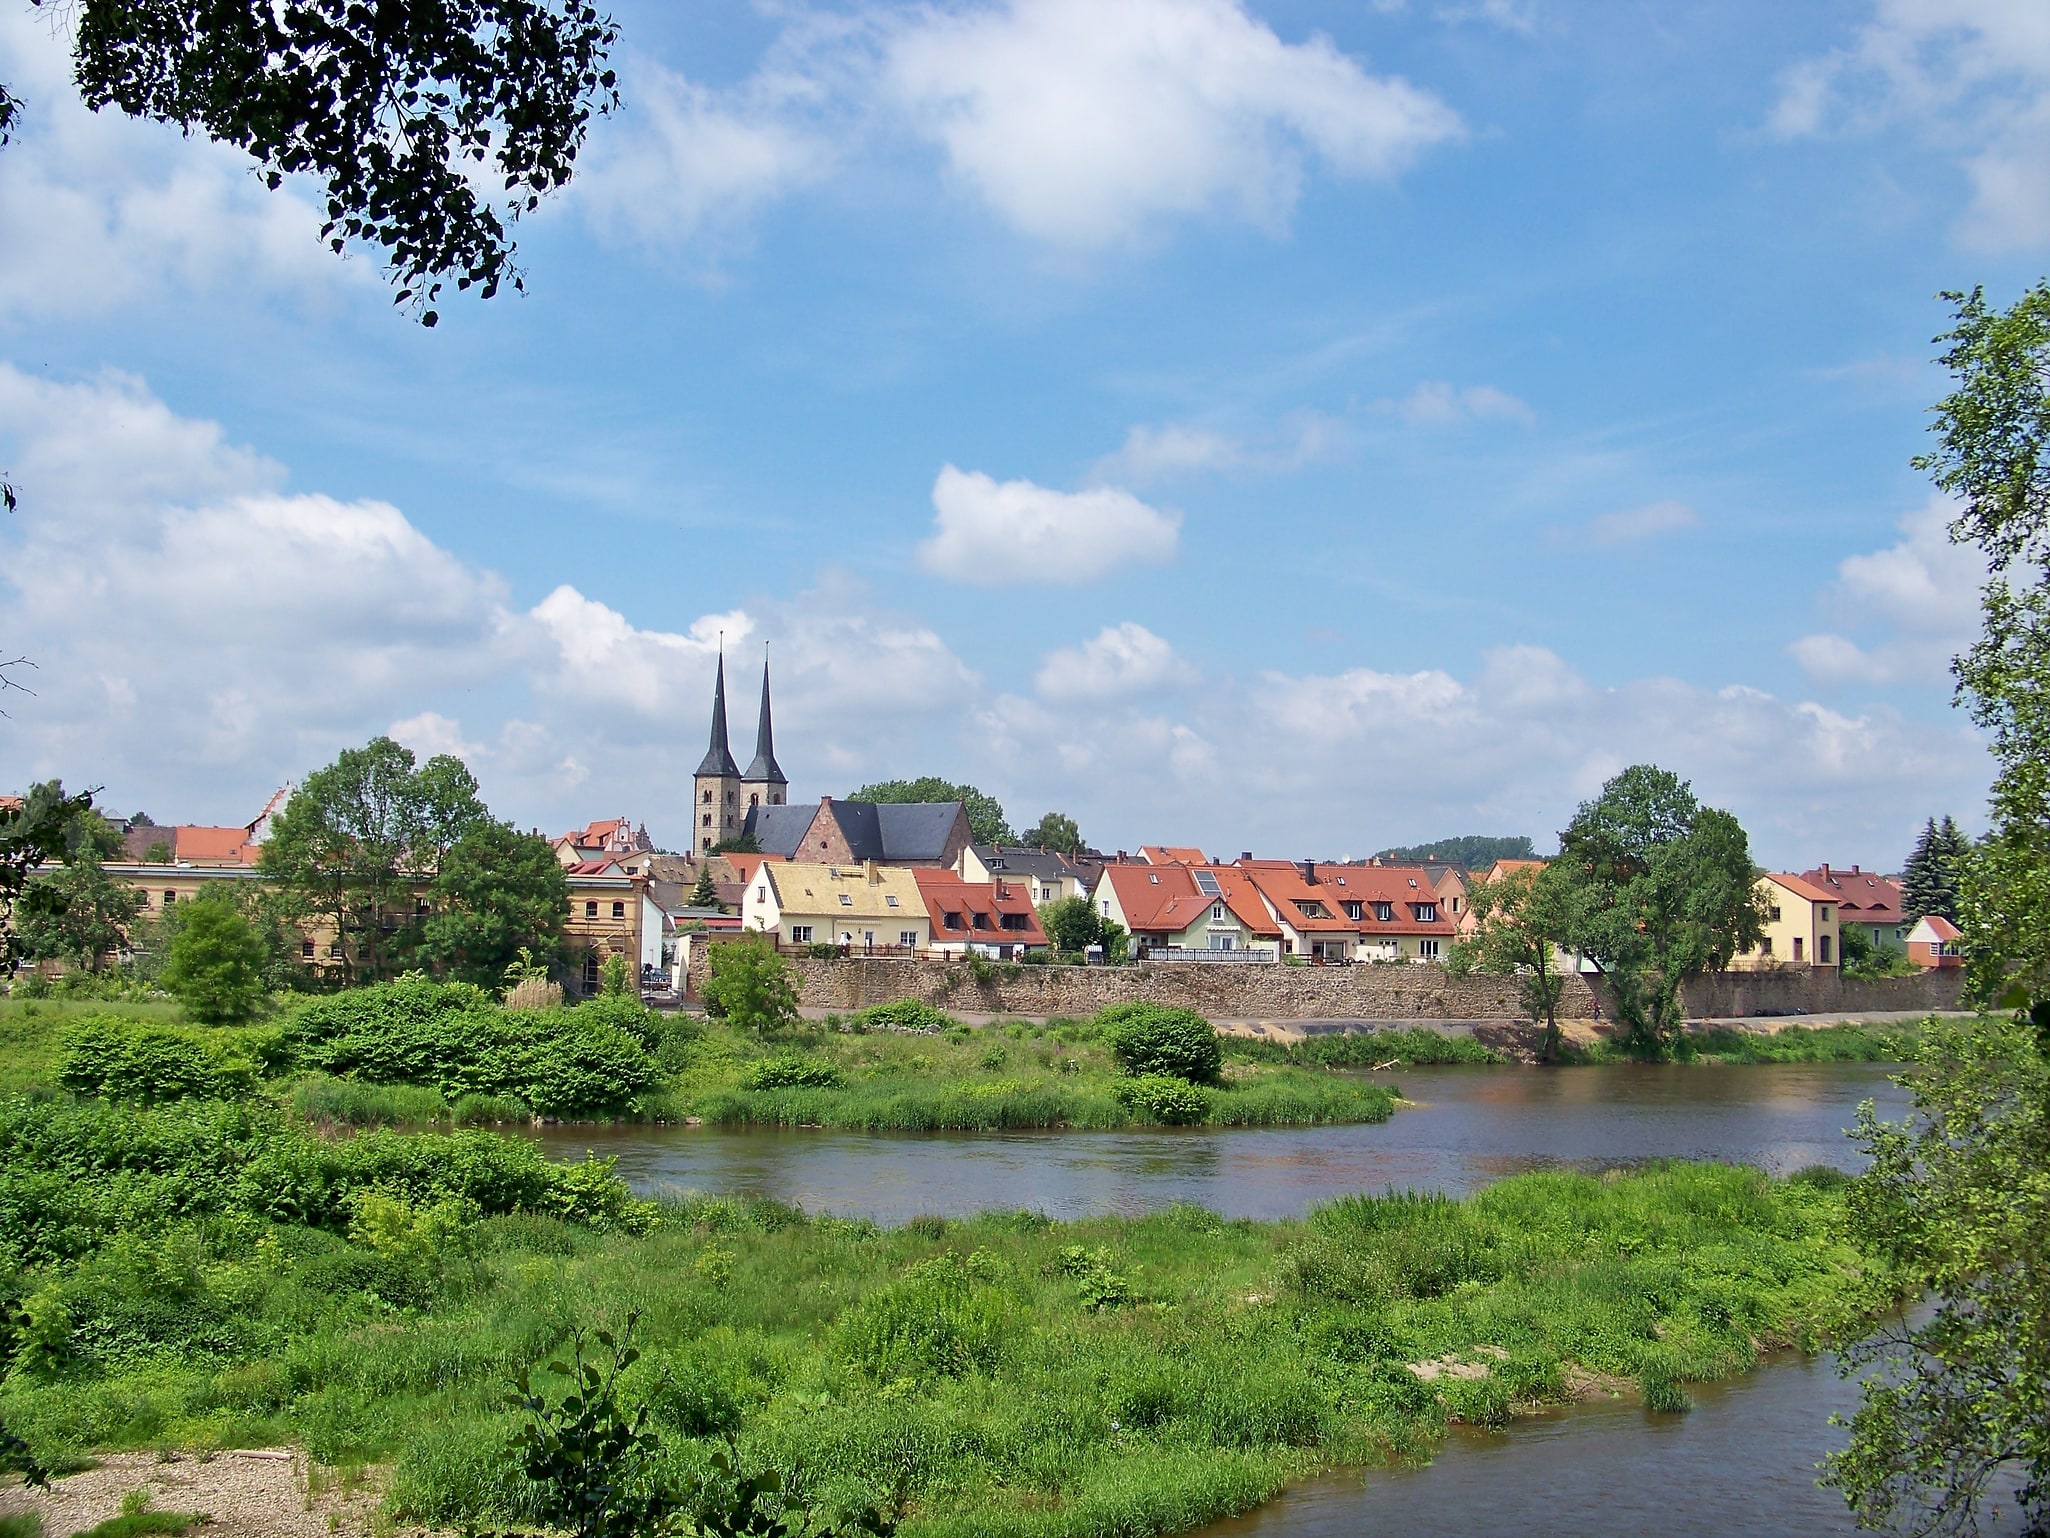 Grimma, Germany